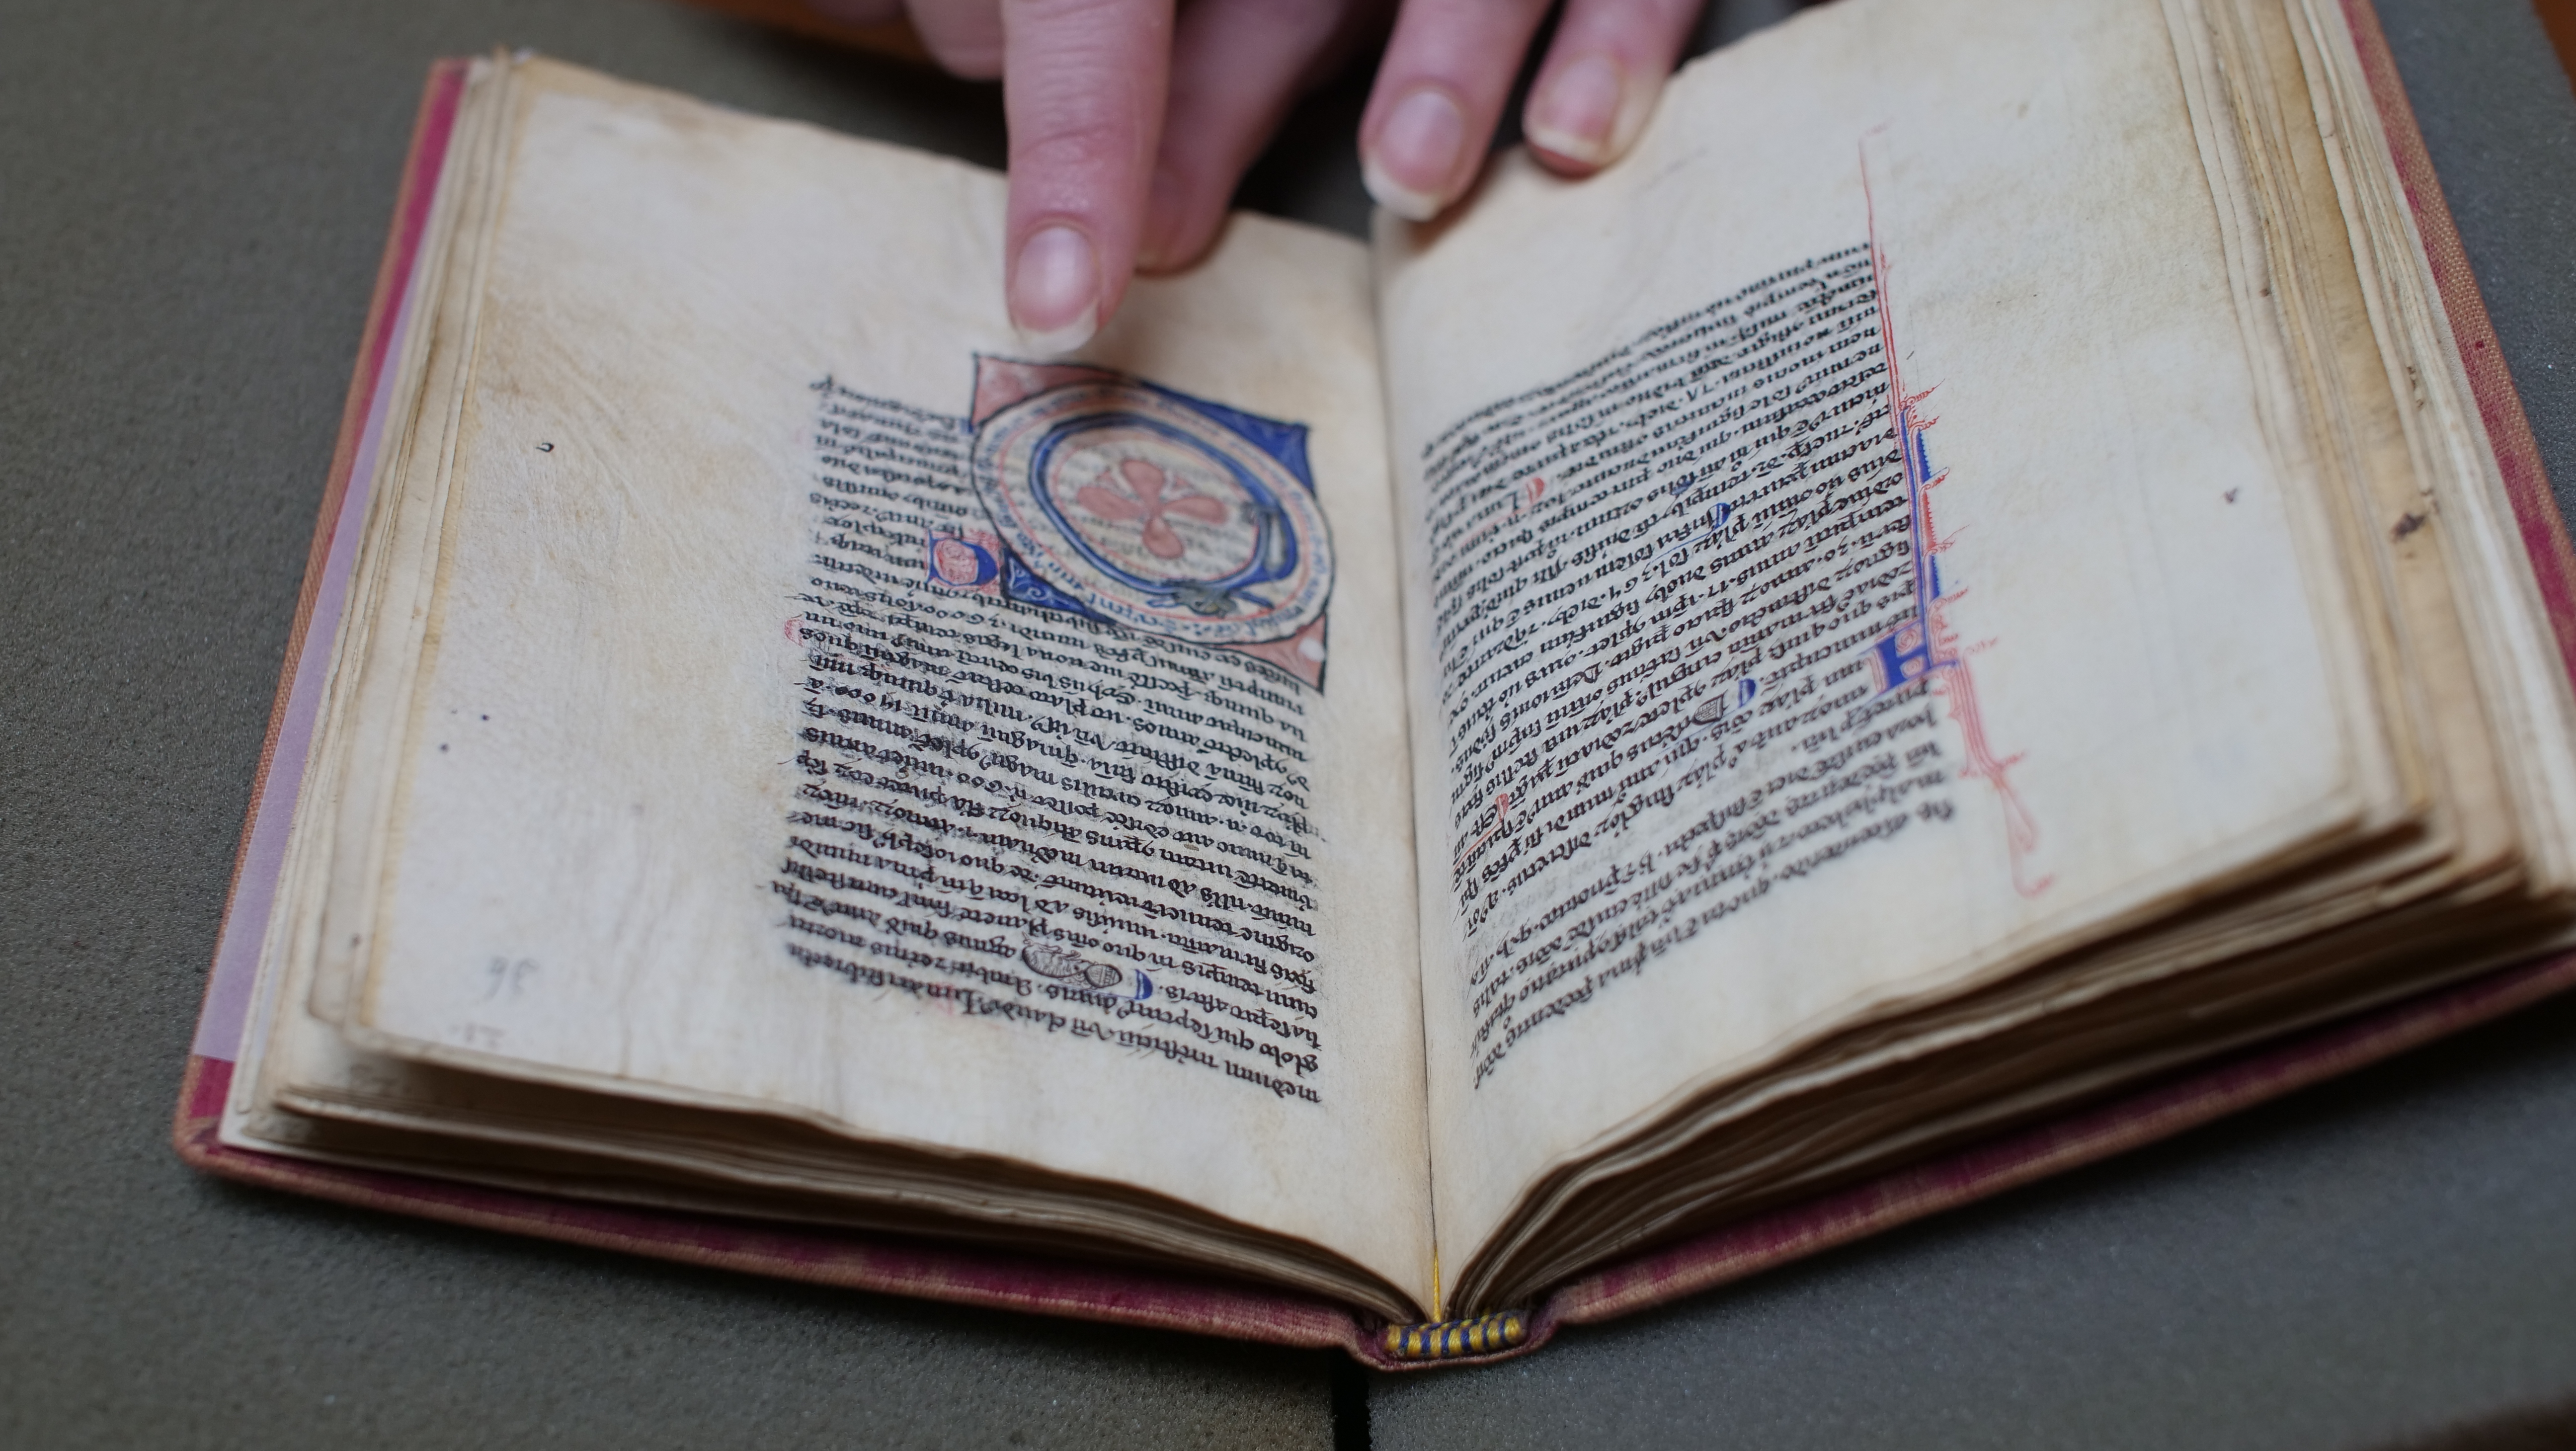 Hand pointing to text and an ancient symbol in an antique book.